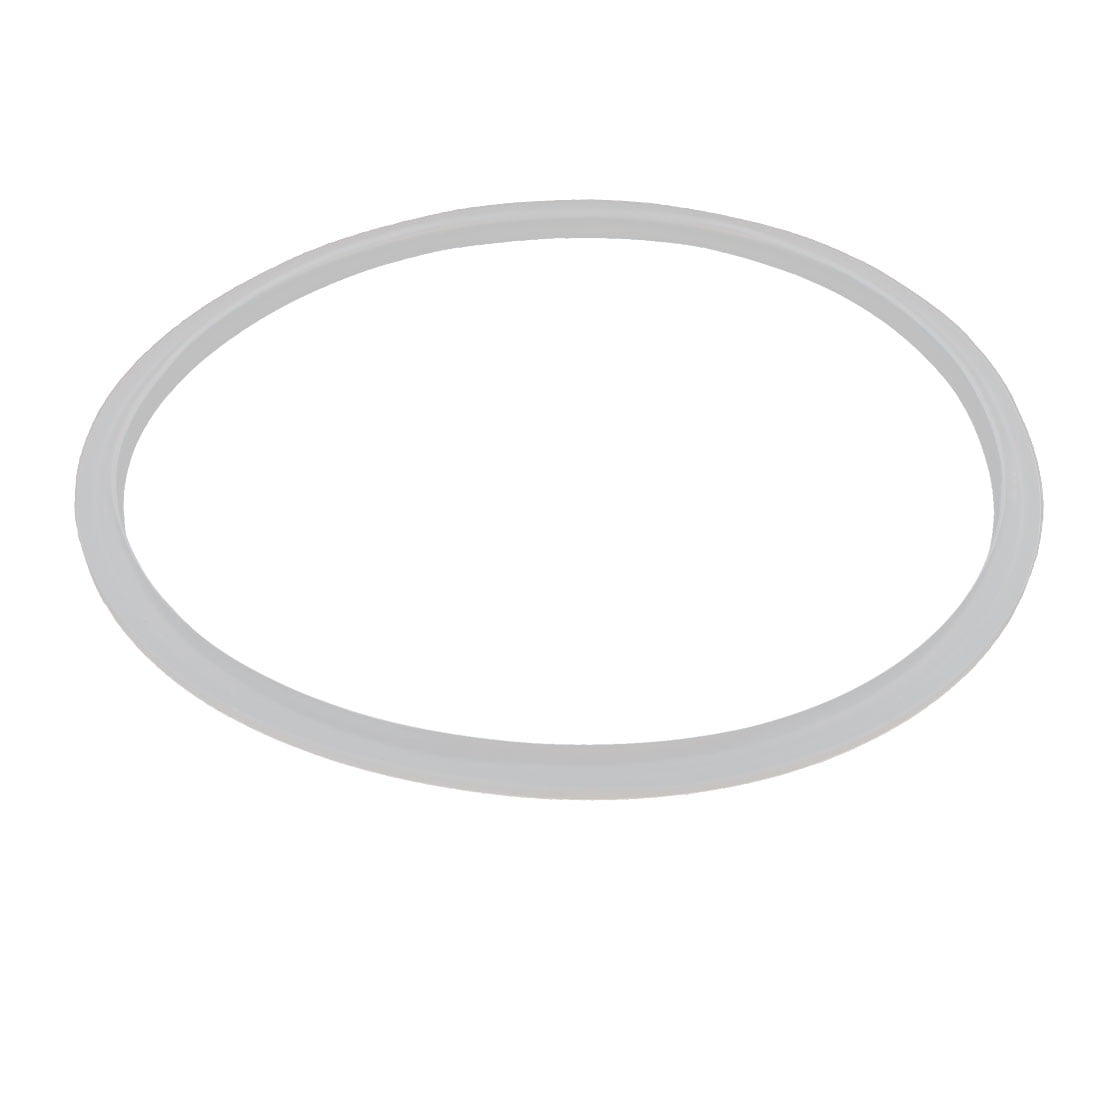 24.5 cm Seal Gasket for Tower Aluminium Pressure Cookers Stated In Description 